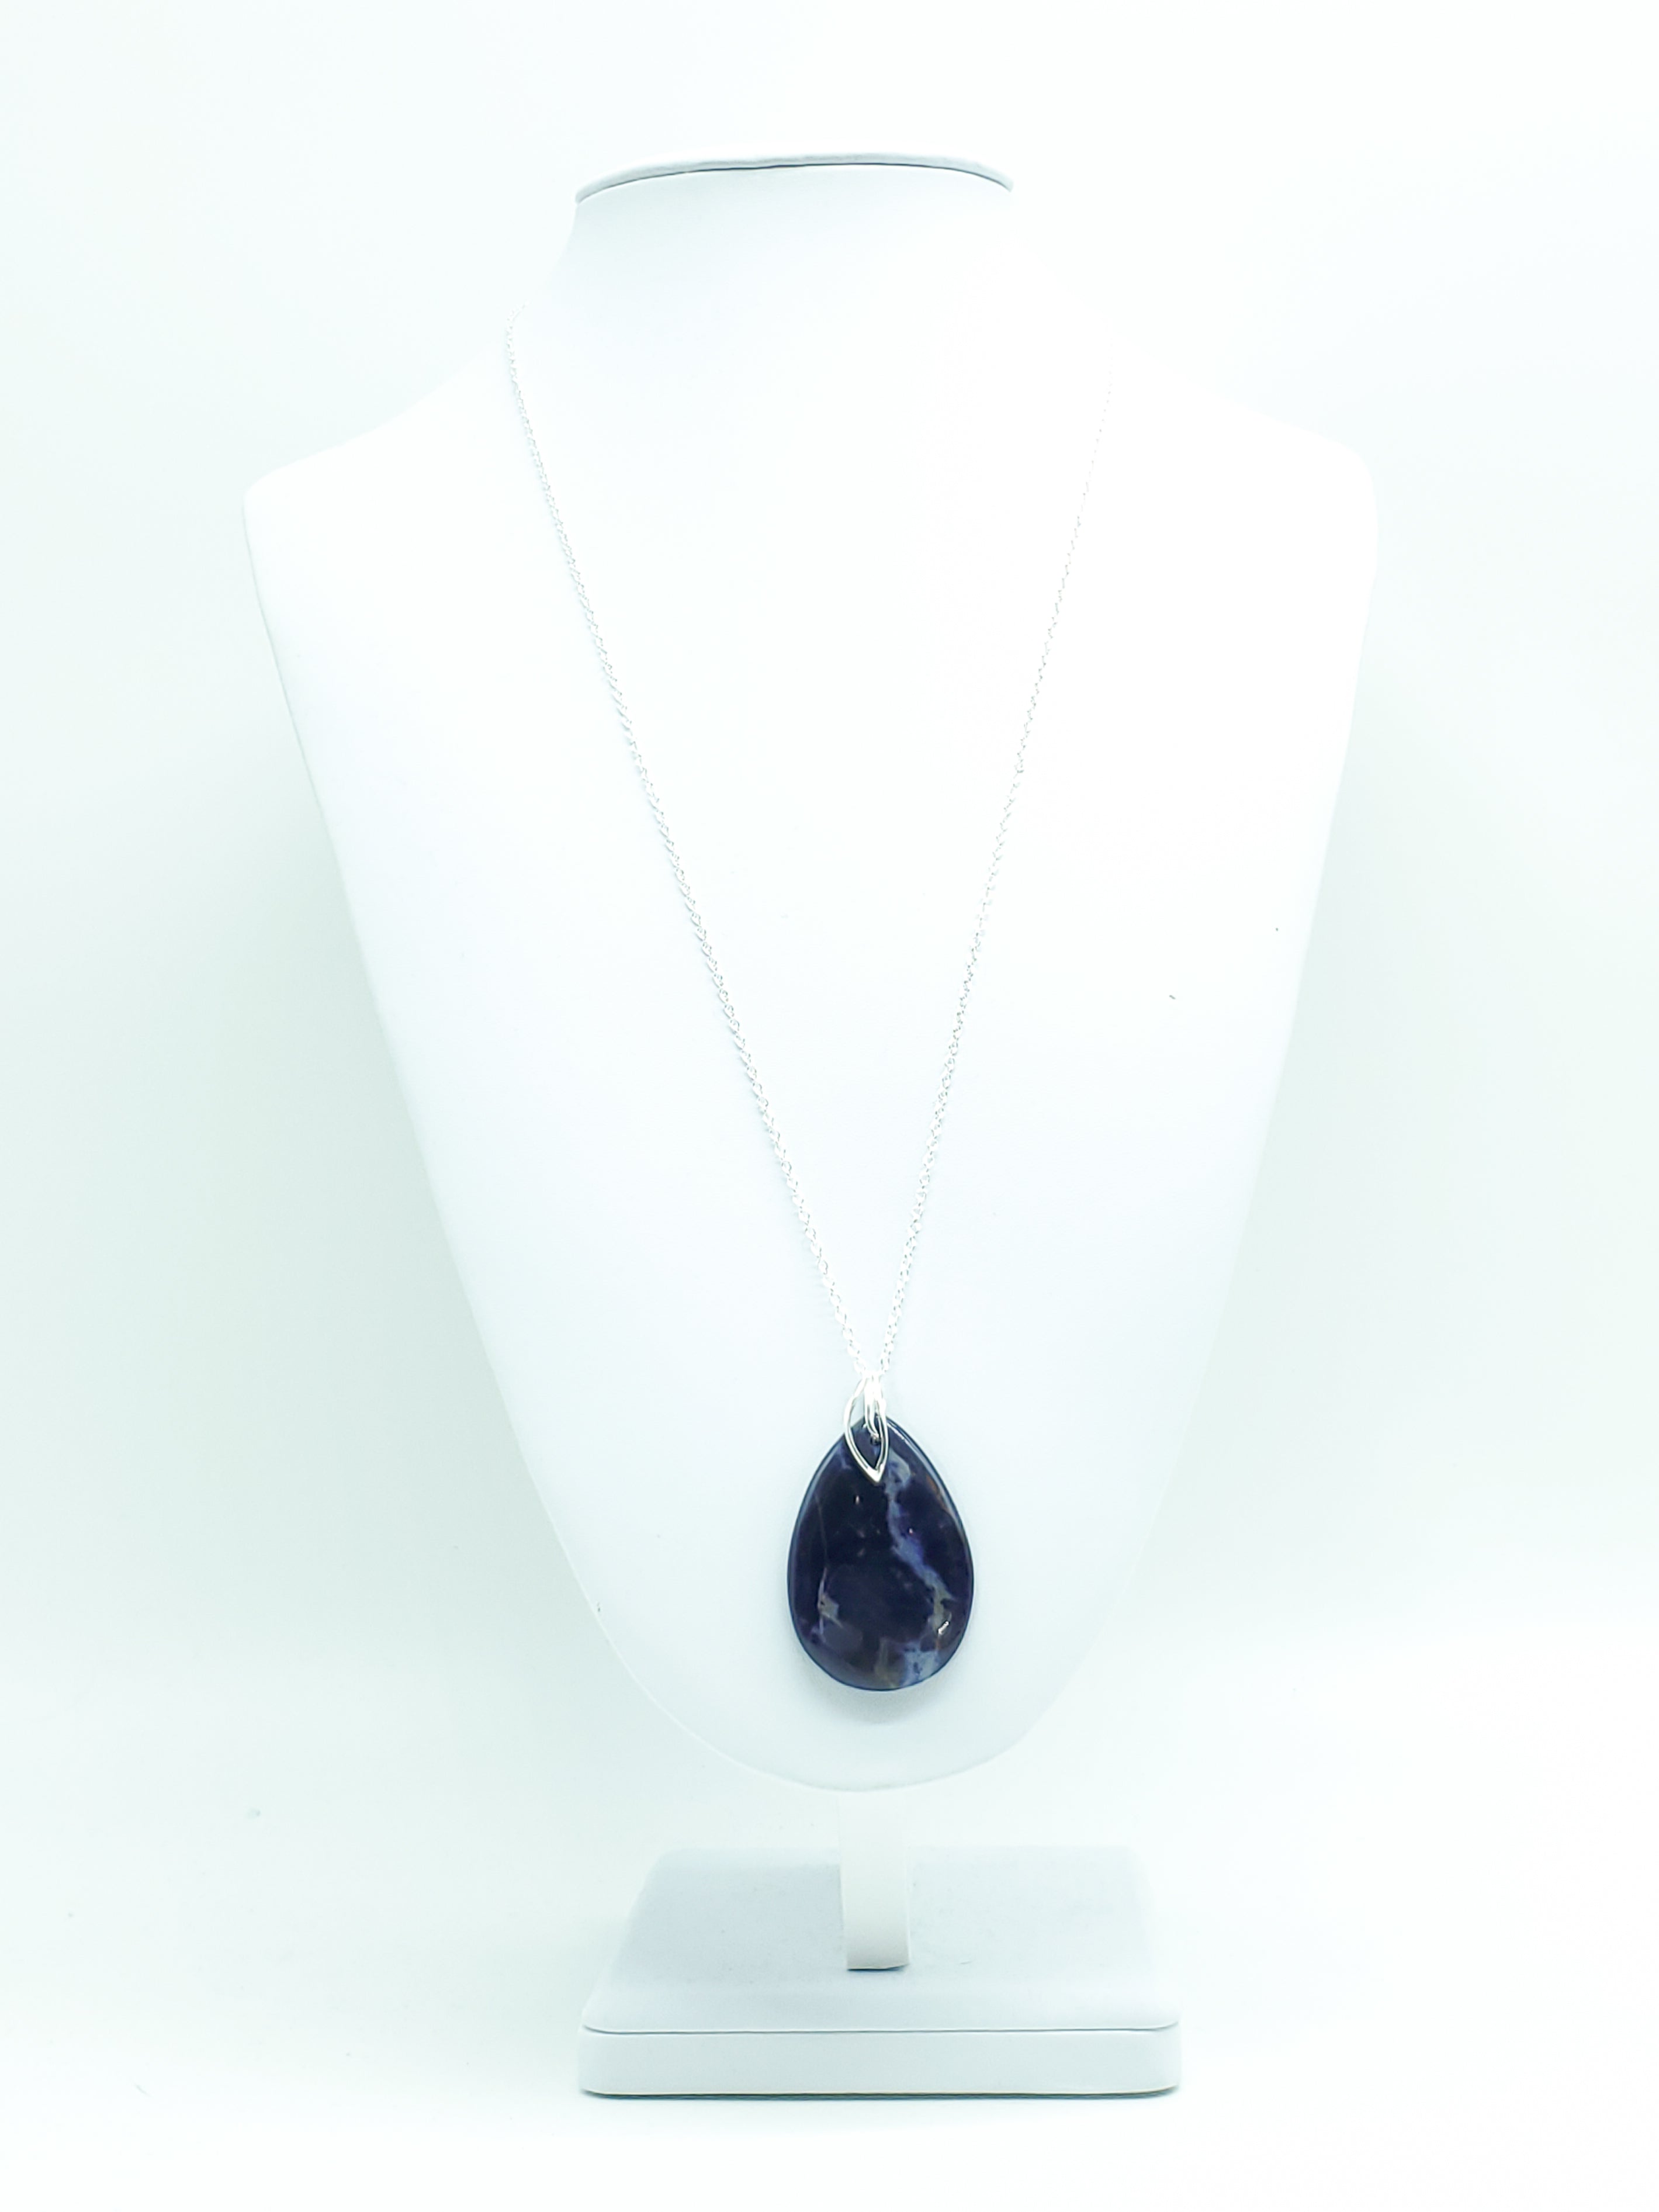 Teardrop Sodalite Pendant on Sterling Silver Leaf Bail and Chain - The Caffeinated Raven